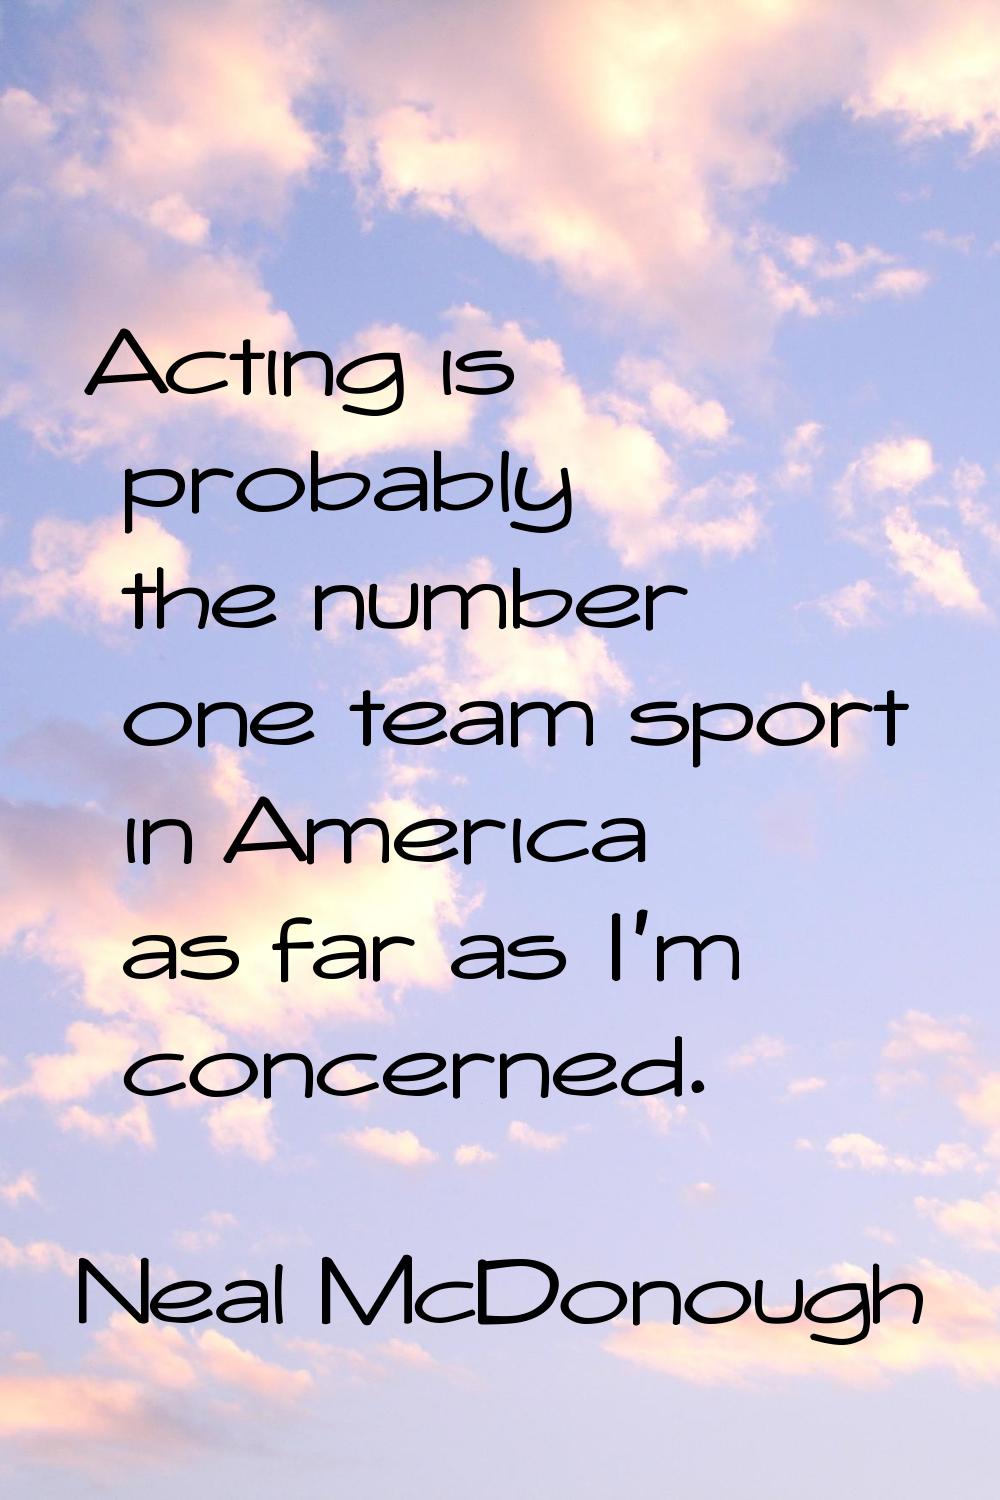 Acting is probably the number one team sport in America as far as I'm concerned.